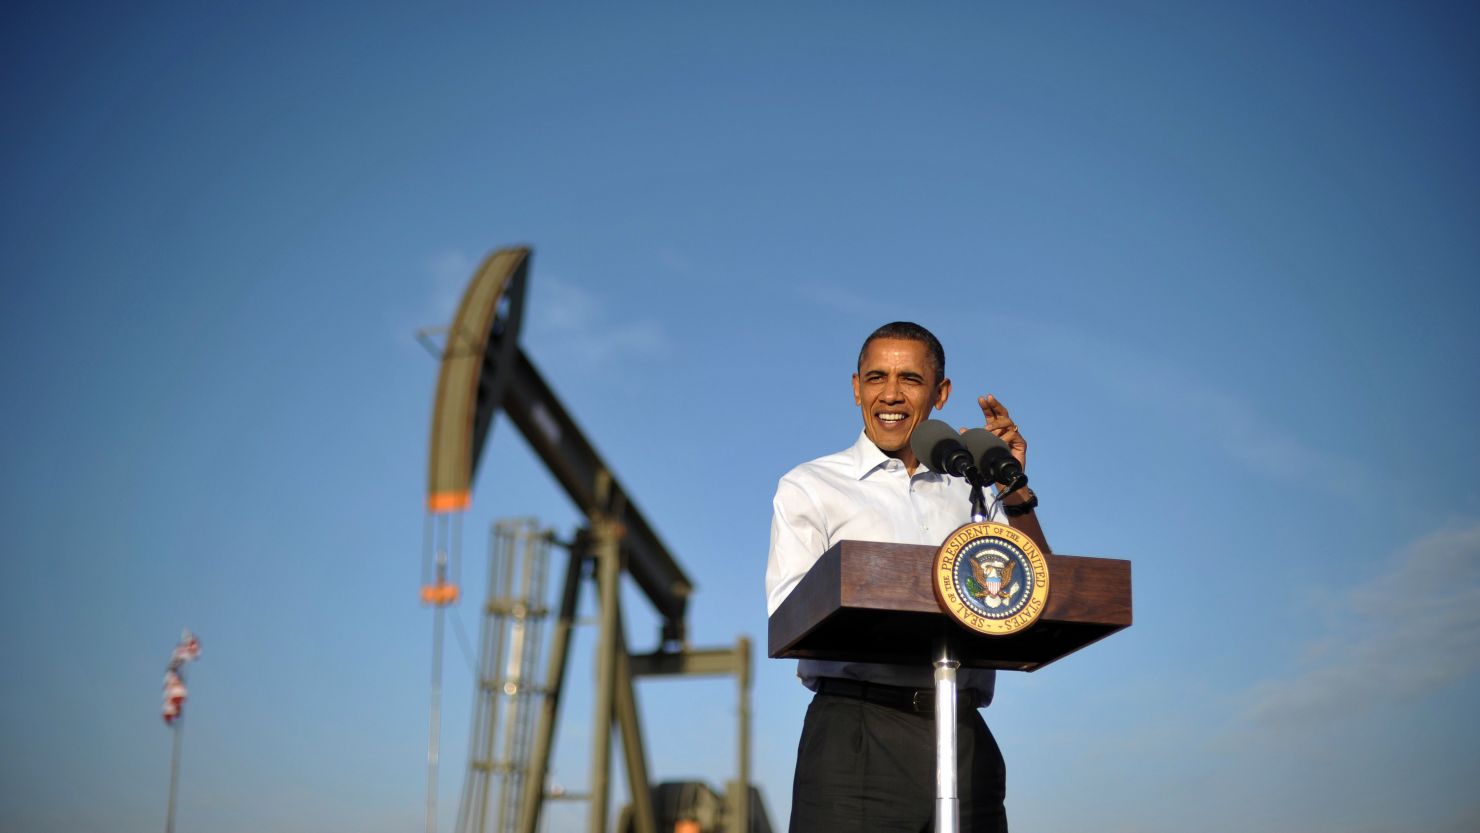 US President Barack Obama speaks at an oil and gas production fields on federal lands March 21, 2012 near Maljamar, NM